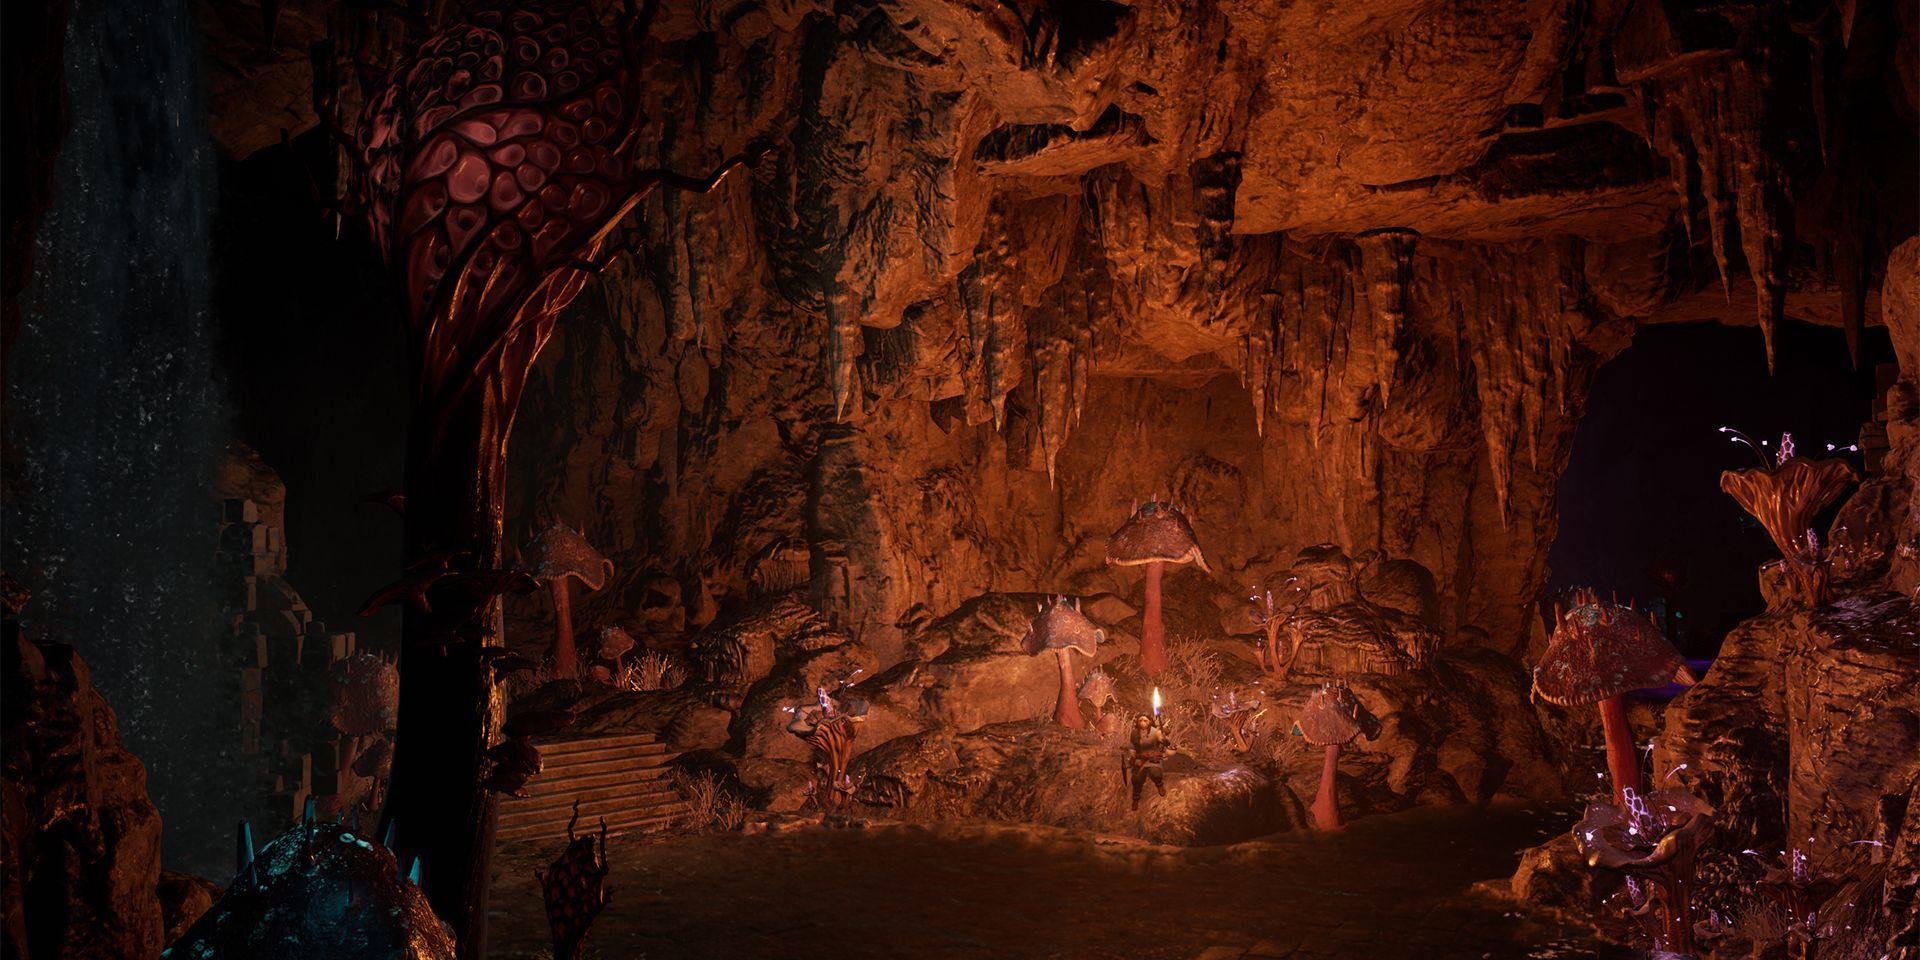 A cave illuminated by a torch in The Lord of the Rings Return to Moria